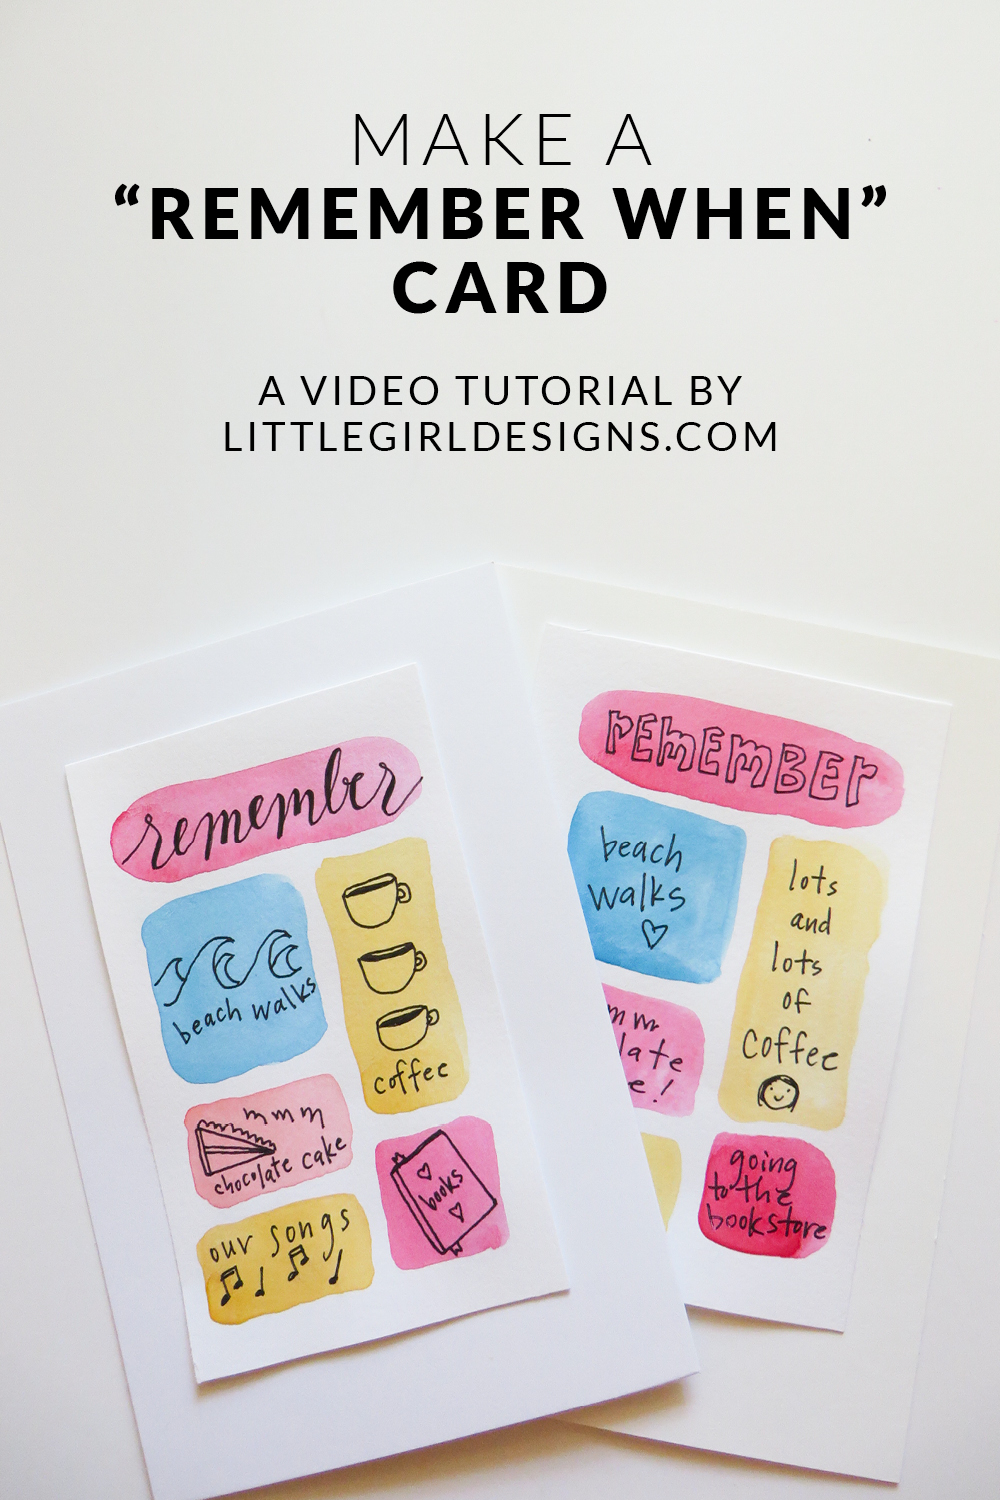 How to Make a Remember When Card